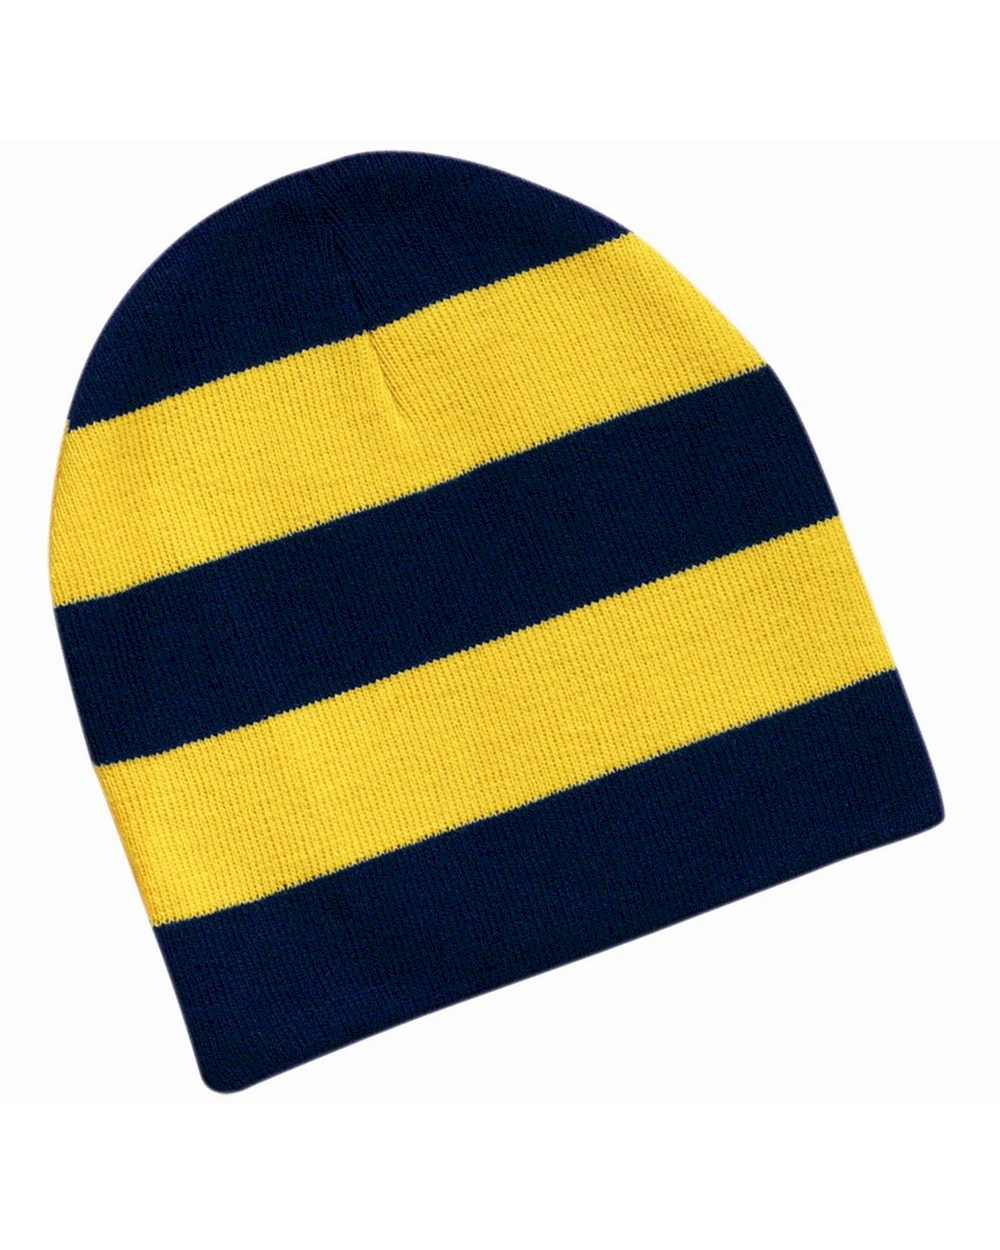 Rugby Striped Knit Beanie Embroidery Blanks - Navy/Gold